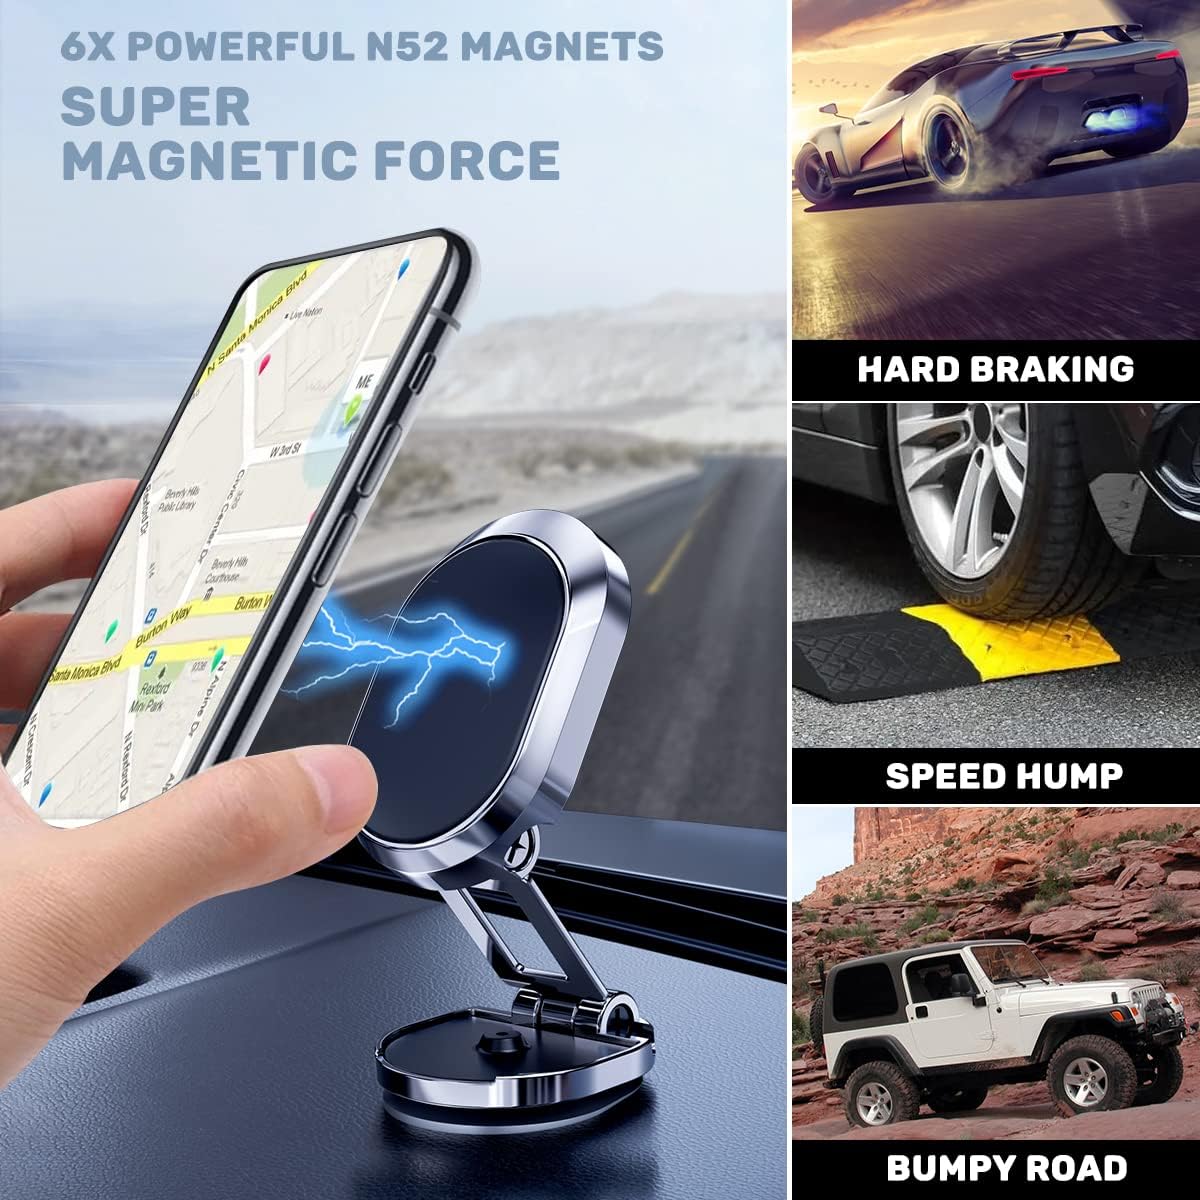 The collage image shows the capability of Car Mobile Phone Holder